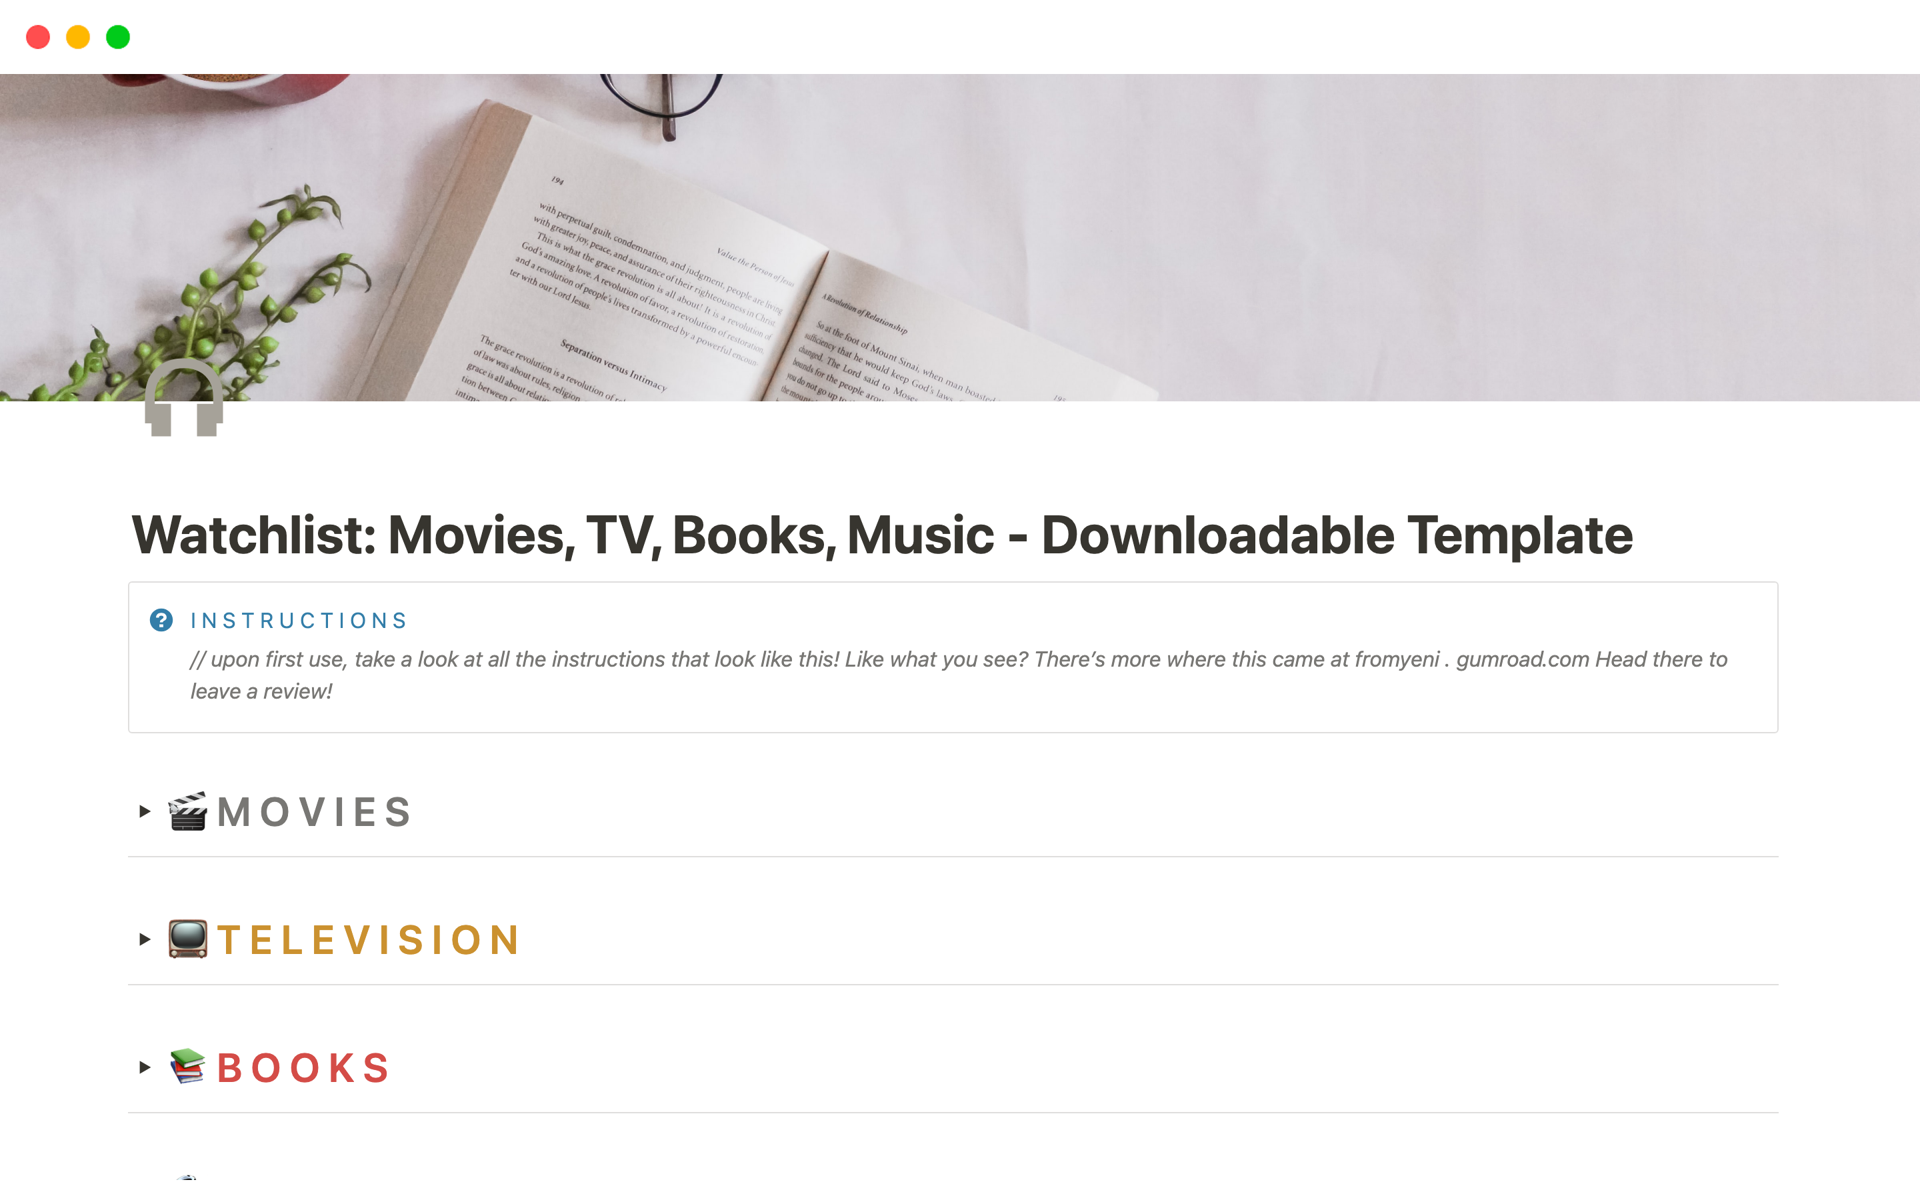 Keep record of your media watchlist: movies, tv shows, books, and music